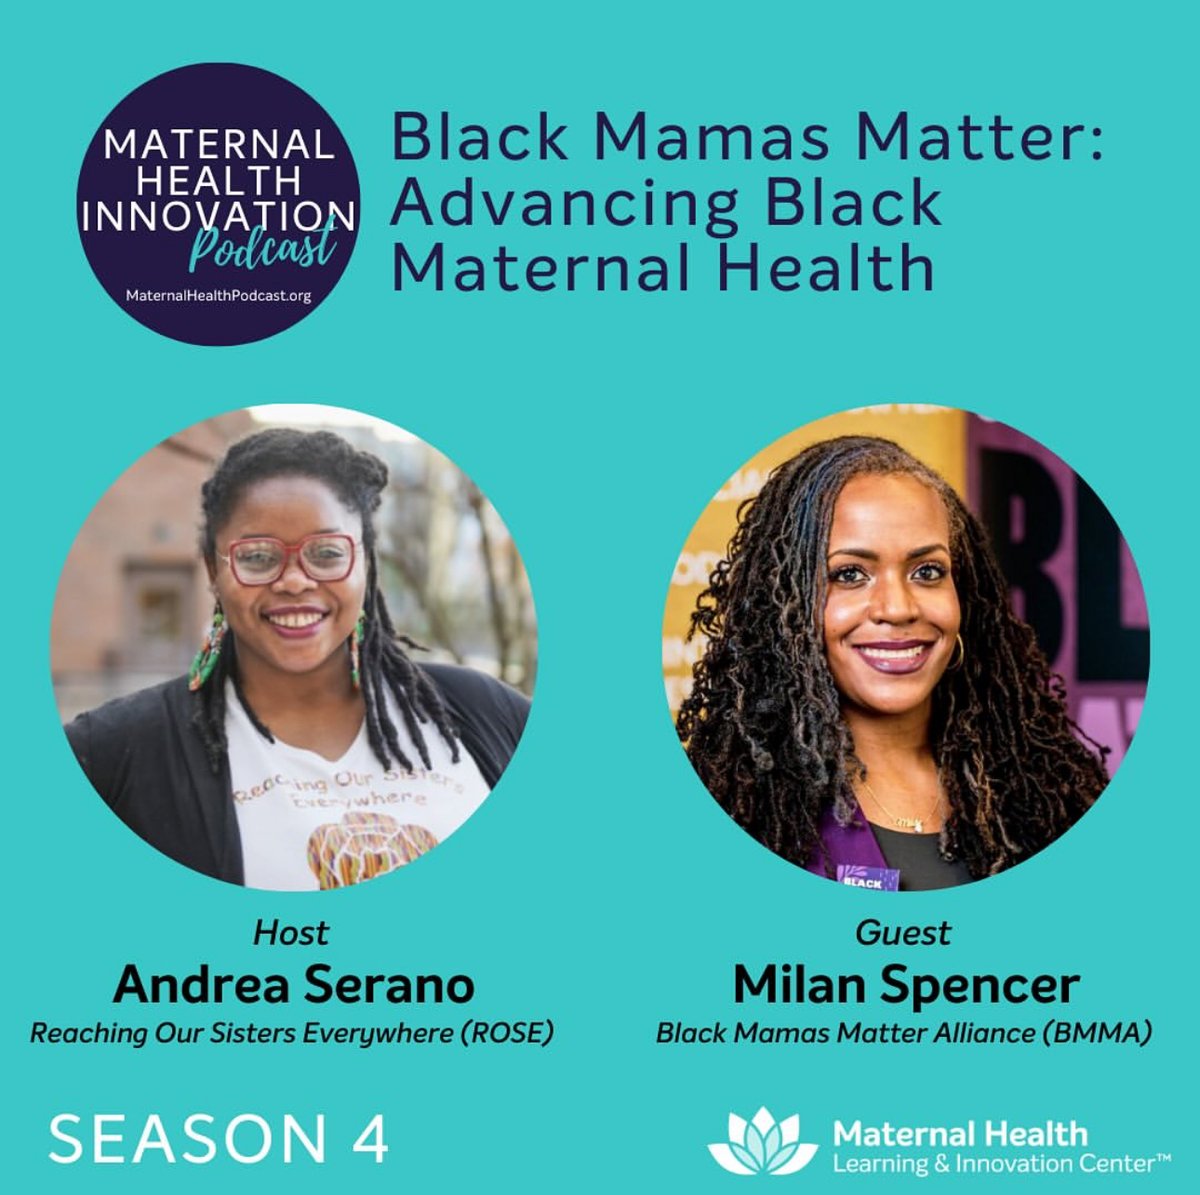 BMMA's Milan Spencer joins @MHLIC_org to discuss #BlackMaternalHealth & achieving birth equity! Learn more about policy solutions in 'Black Mamas Matter in Policy & Practice': blackmamasmatter.org/policy-agenda #BlackMamasMatter #ReproductiveJustice